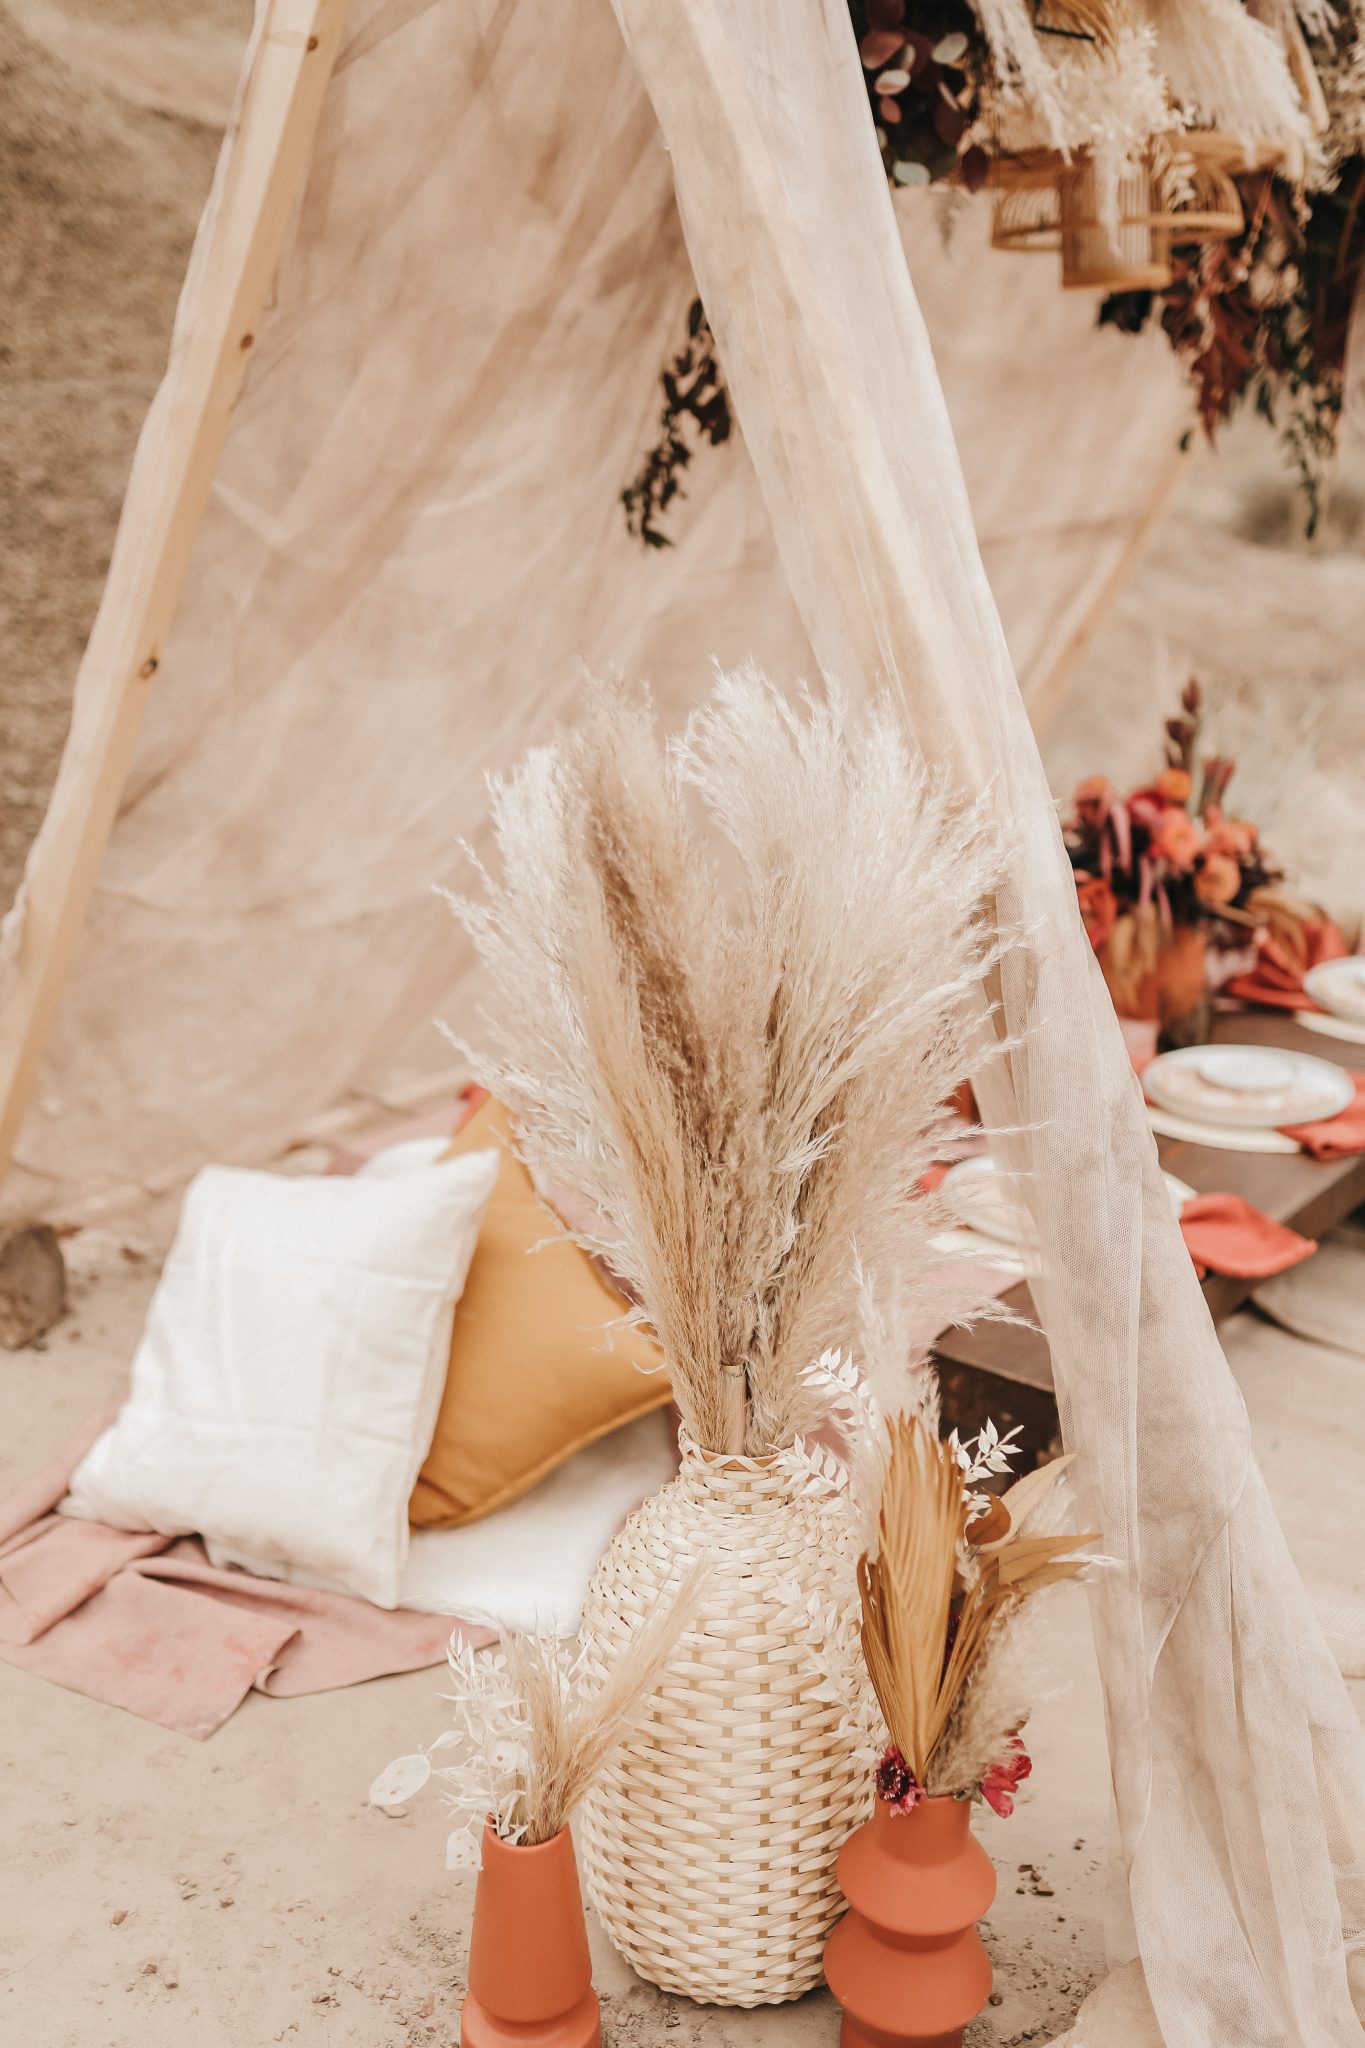 Pampas grass in a wicker vase in front of a linen tent with pillows and a Moroccan inspired elopement tablescape